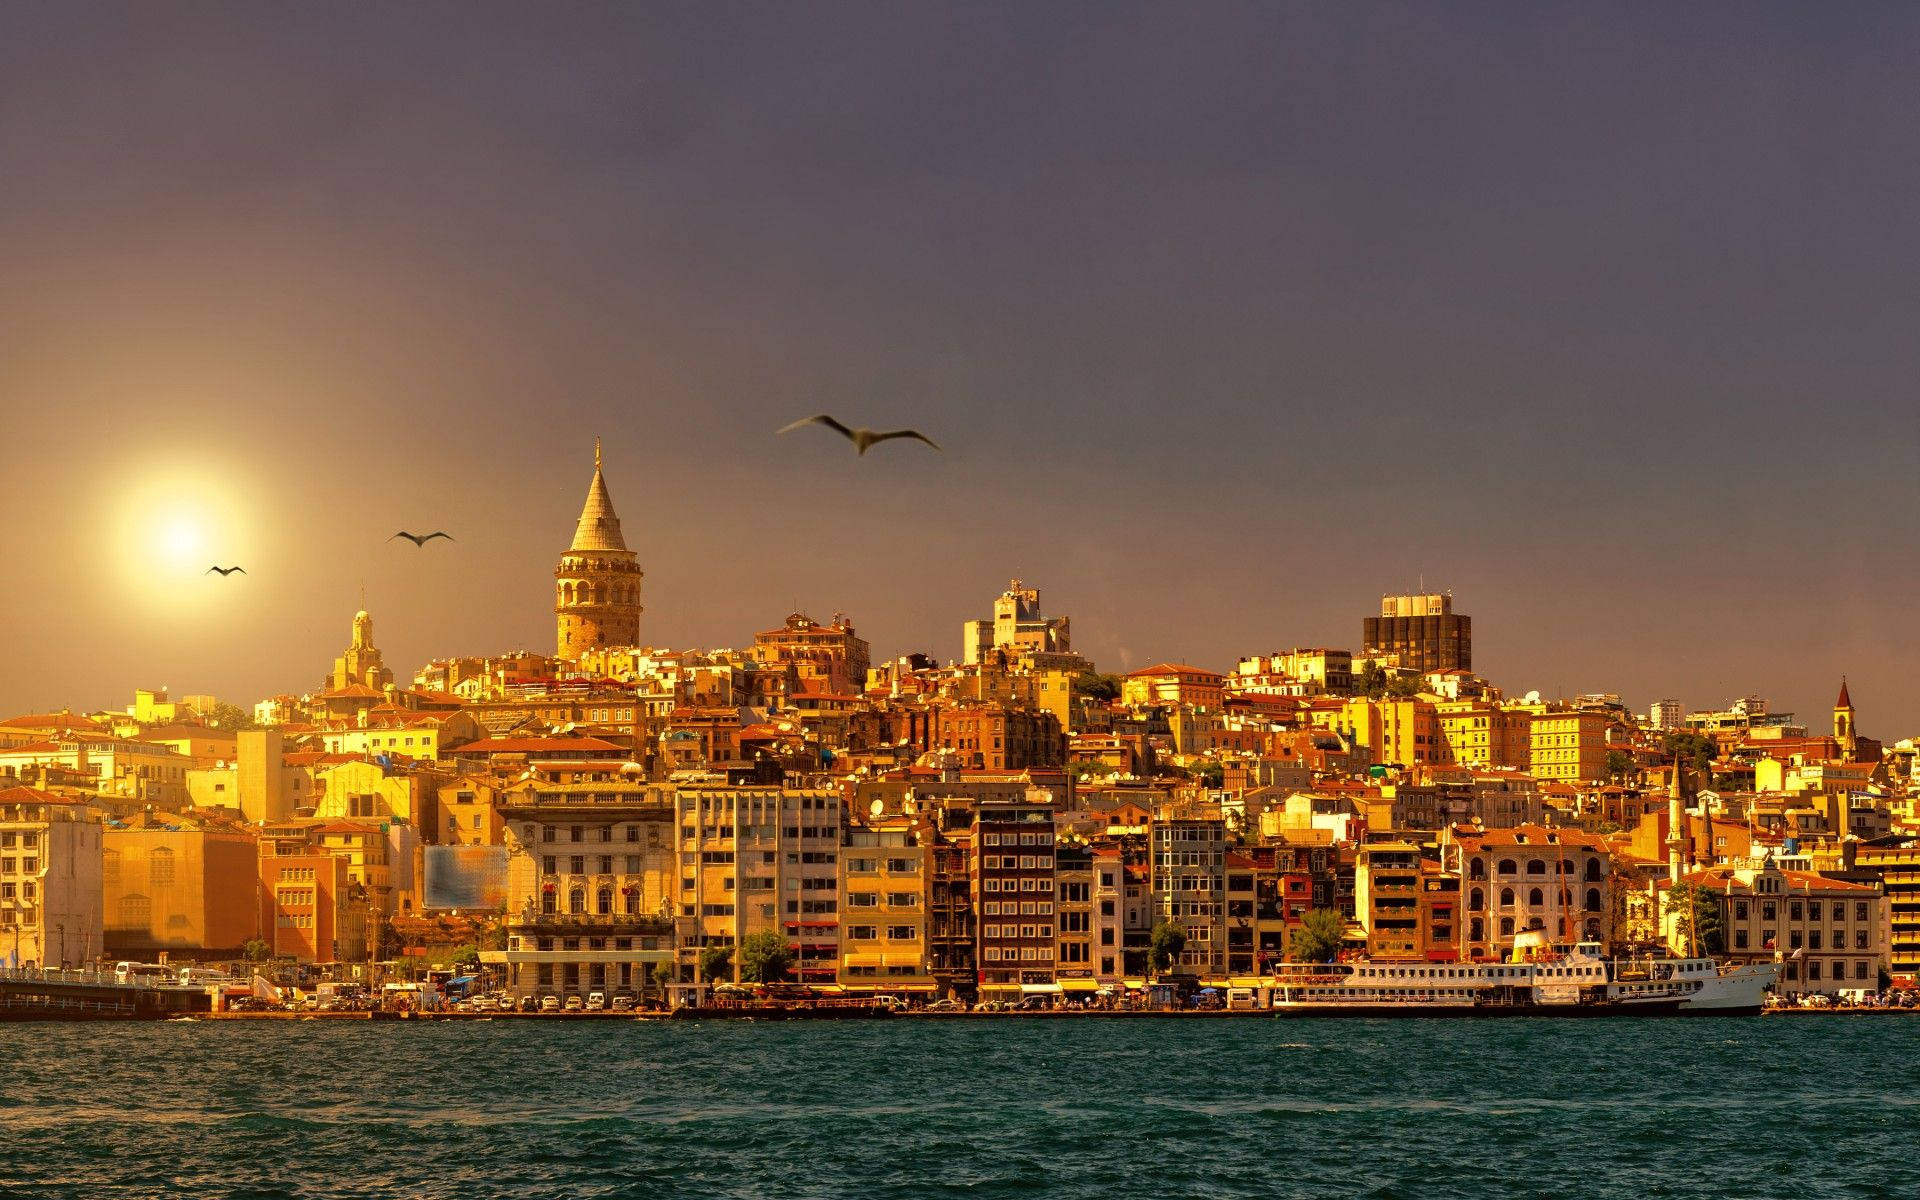 Enjoy the beauty of Istanbul, Turkey during sunset Wallpaper